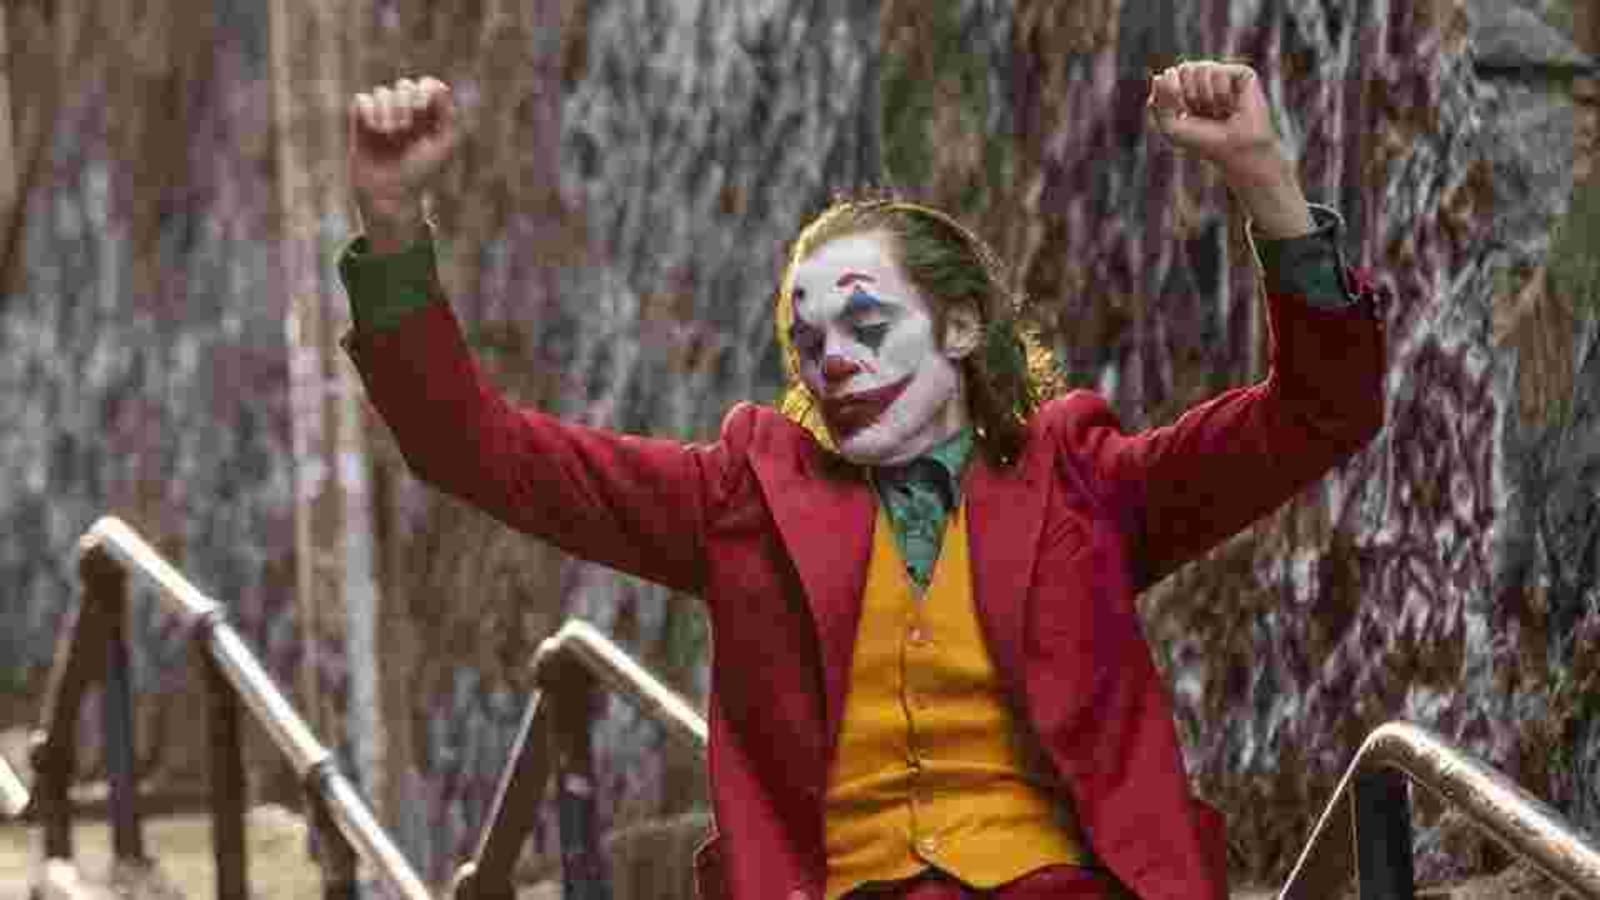 Incredible Compilation of Over 999 Joker Images in Stunning 4K Resolution